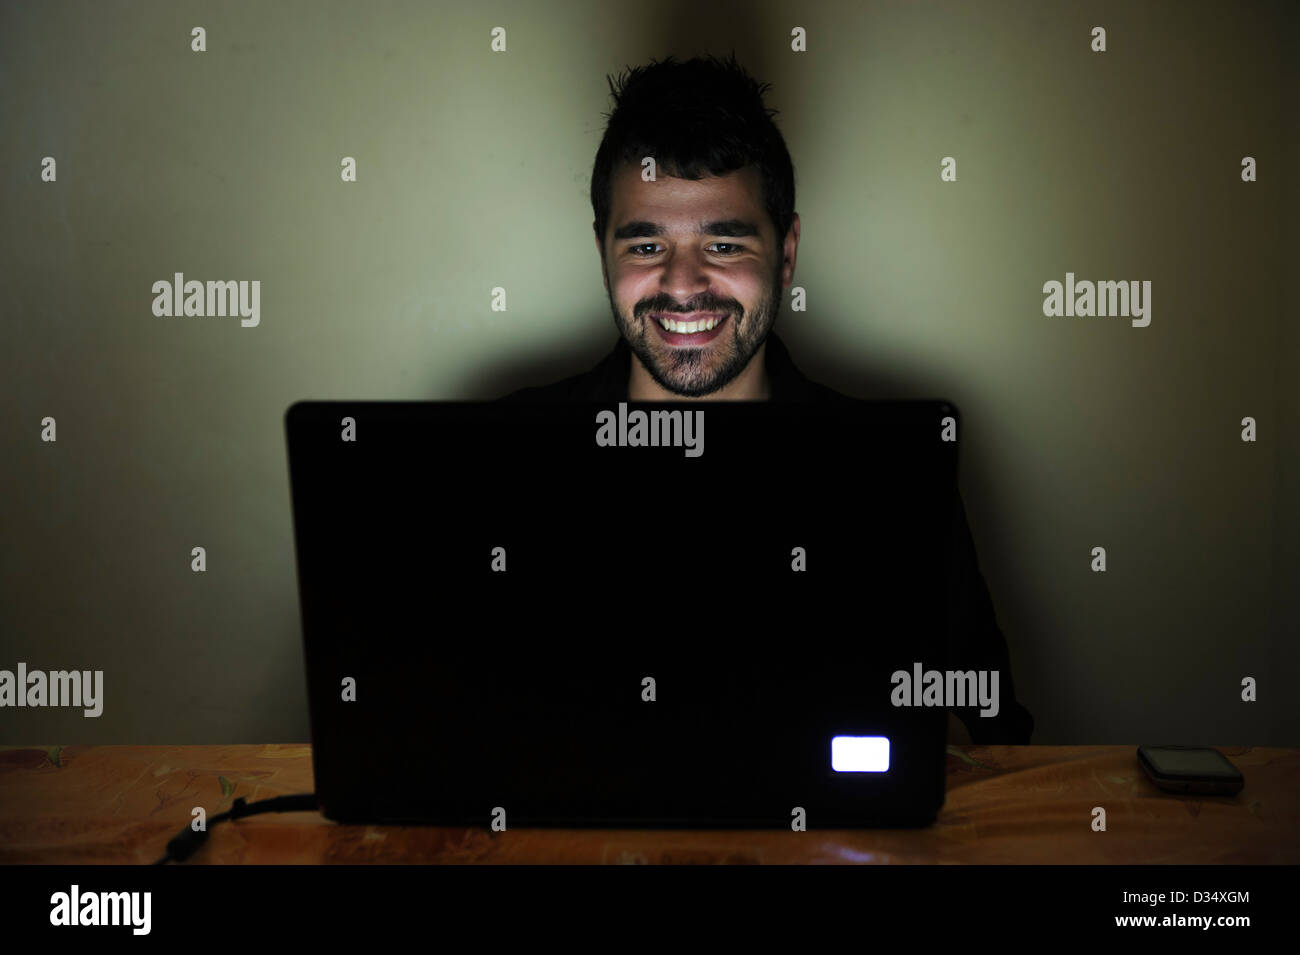 Happy young man on laptop computer smiling Stock Photo